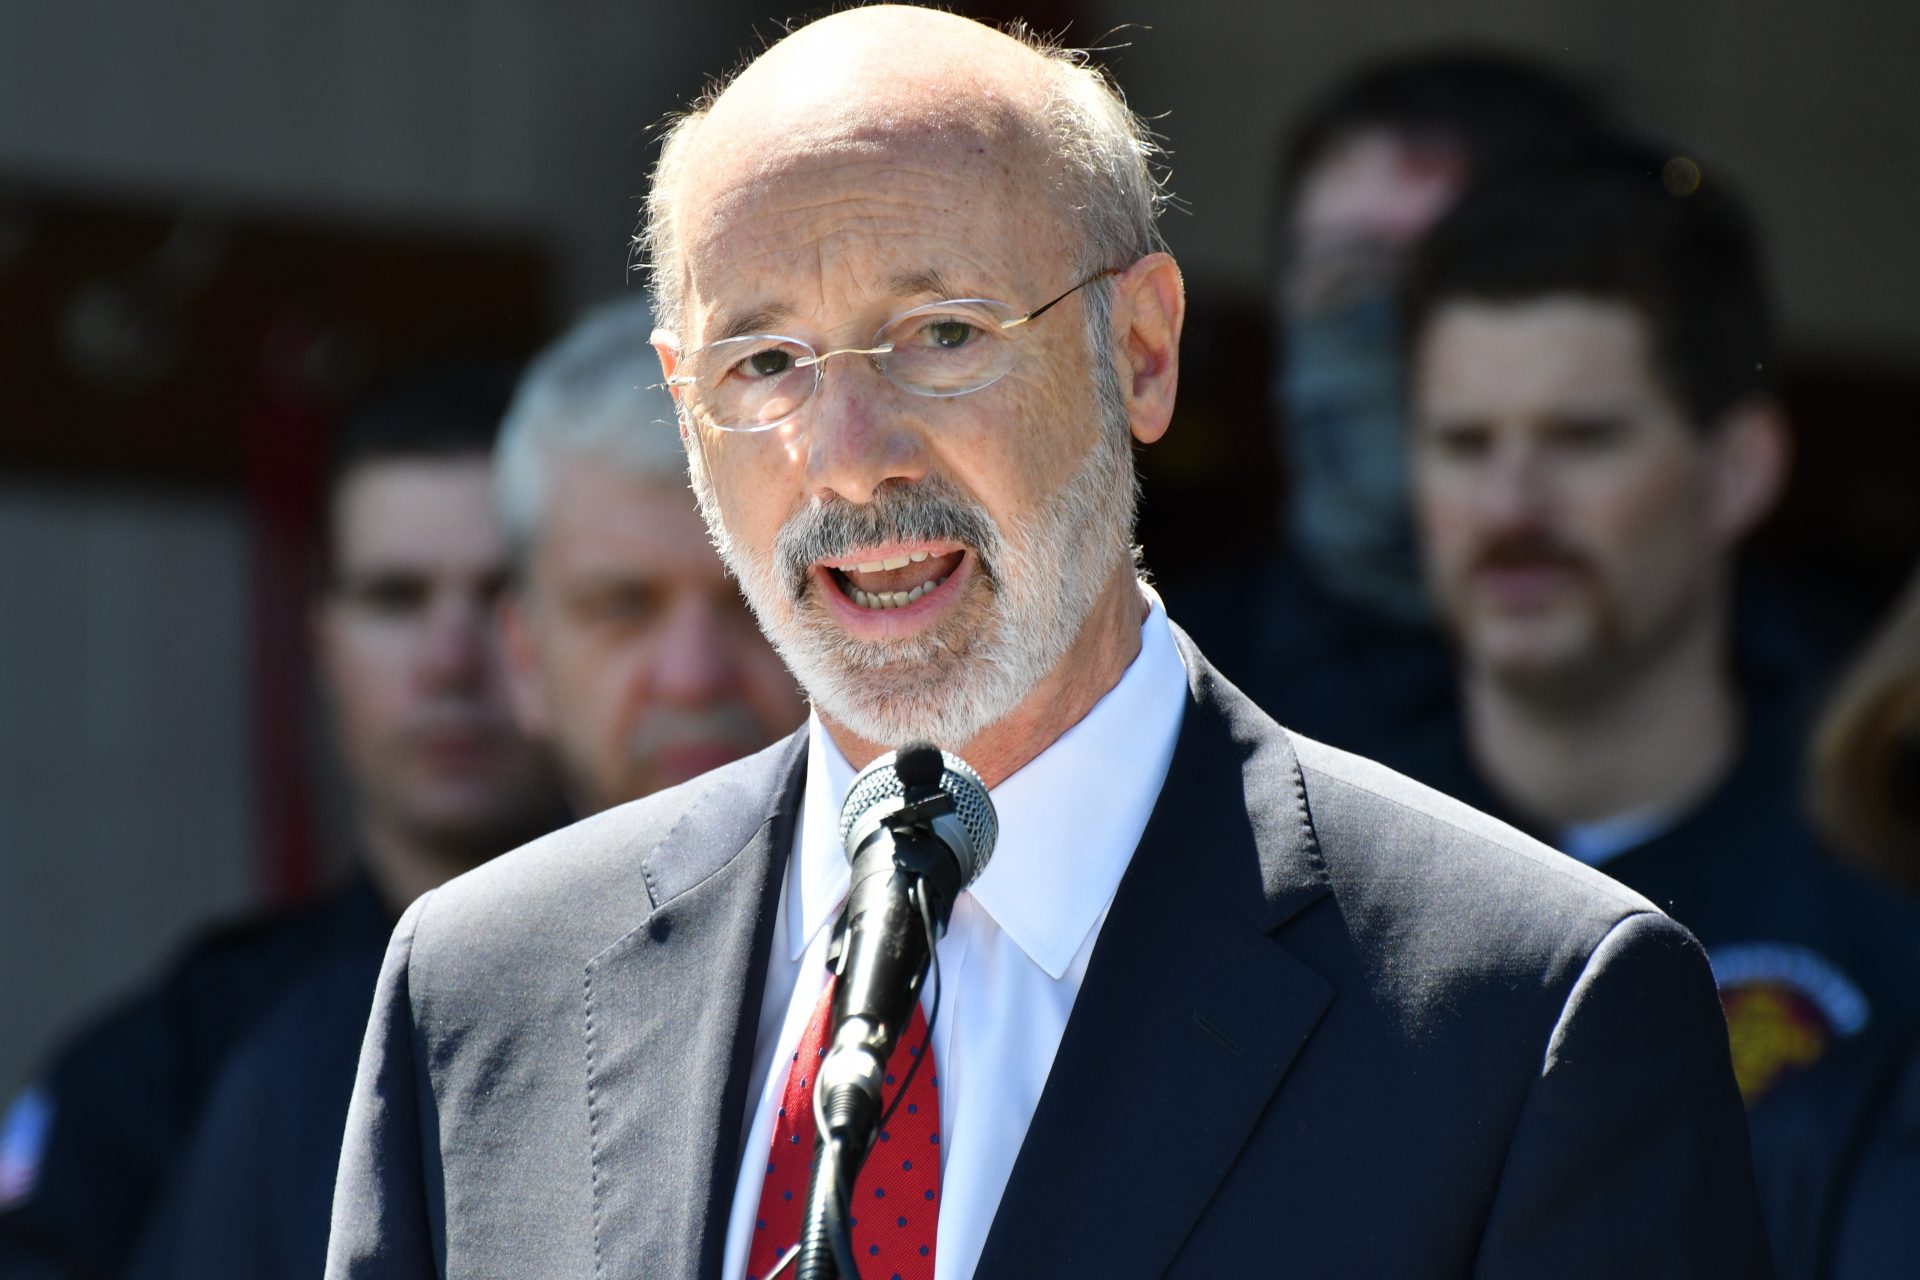 FILE PHOTO: In this May 12, 2021 file photo, Gov. Tom Wolf speaks at an event in Mechanicsburg, Pa. Beyond the local races on ballots, Pennsylvania’s primary election will determine the future of a governor’s authority during disaster declarations. Voters statewide Tuesday, May 18 will decide four separate ballot questions, including two on whether to give state lawmakers much more power over disaster declarations.